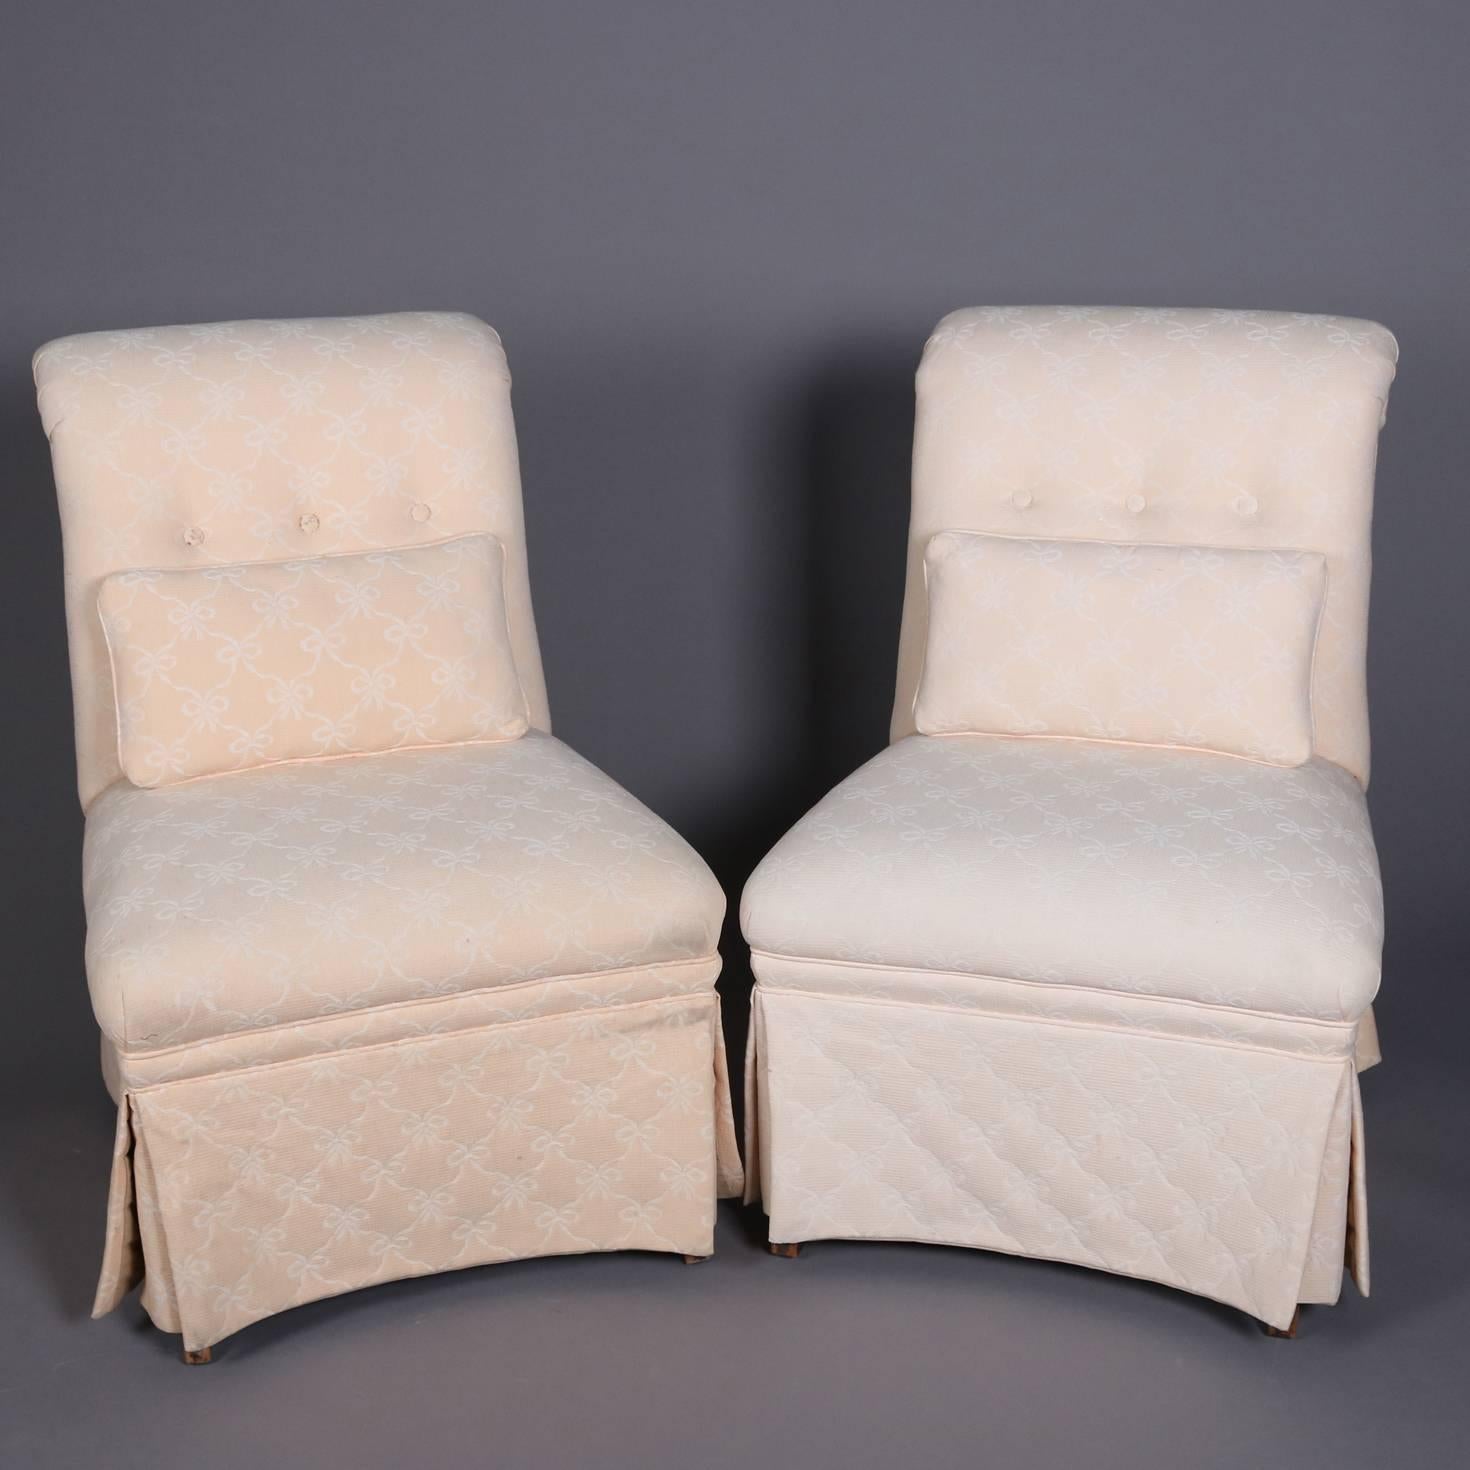 European Pair of Vintage Petite Scroll Back Upholstered Slipper Chairs, 20th Century